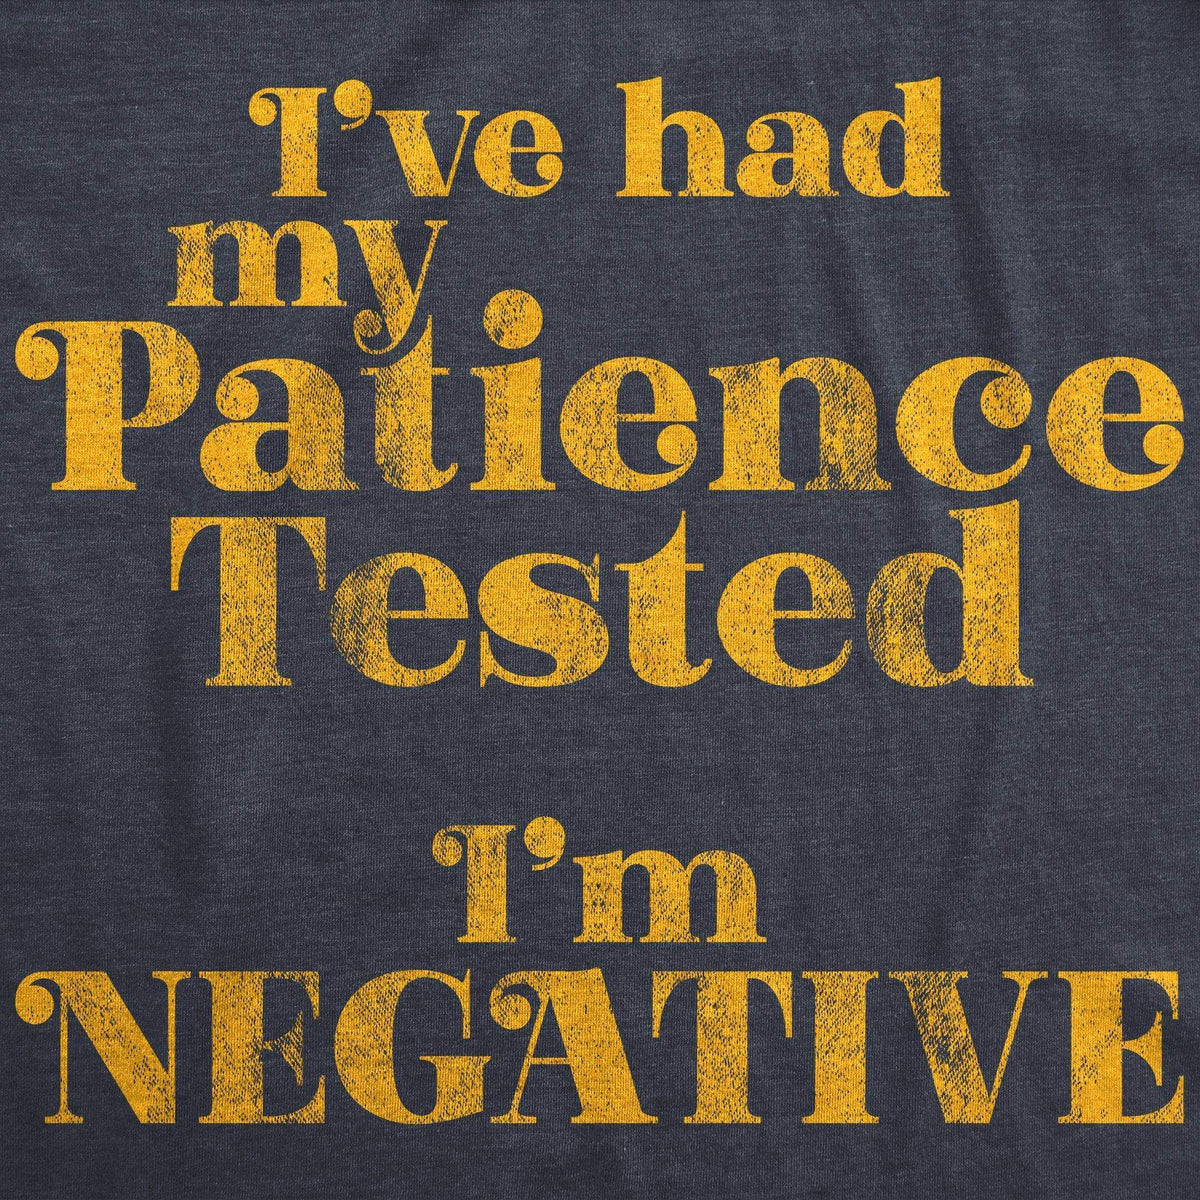 I&#39;ve Had My Patience Tested I&#39;m Negative Women&#39;s Tshirt - Crazy Dog T-Shirts